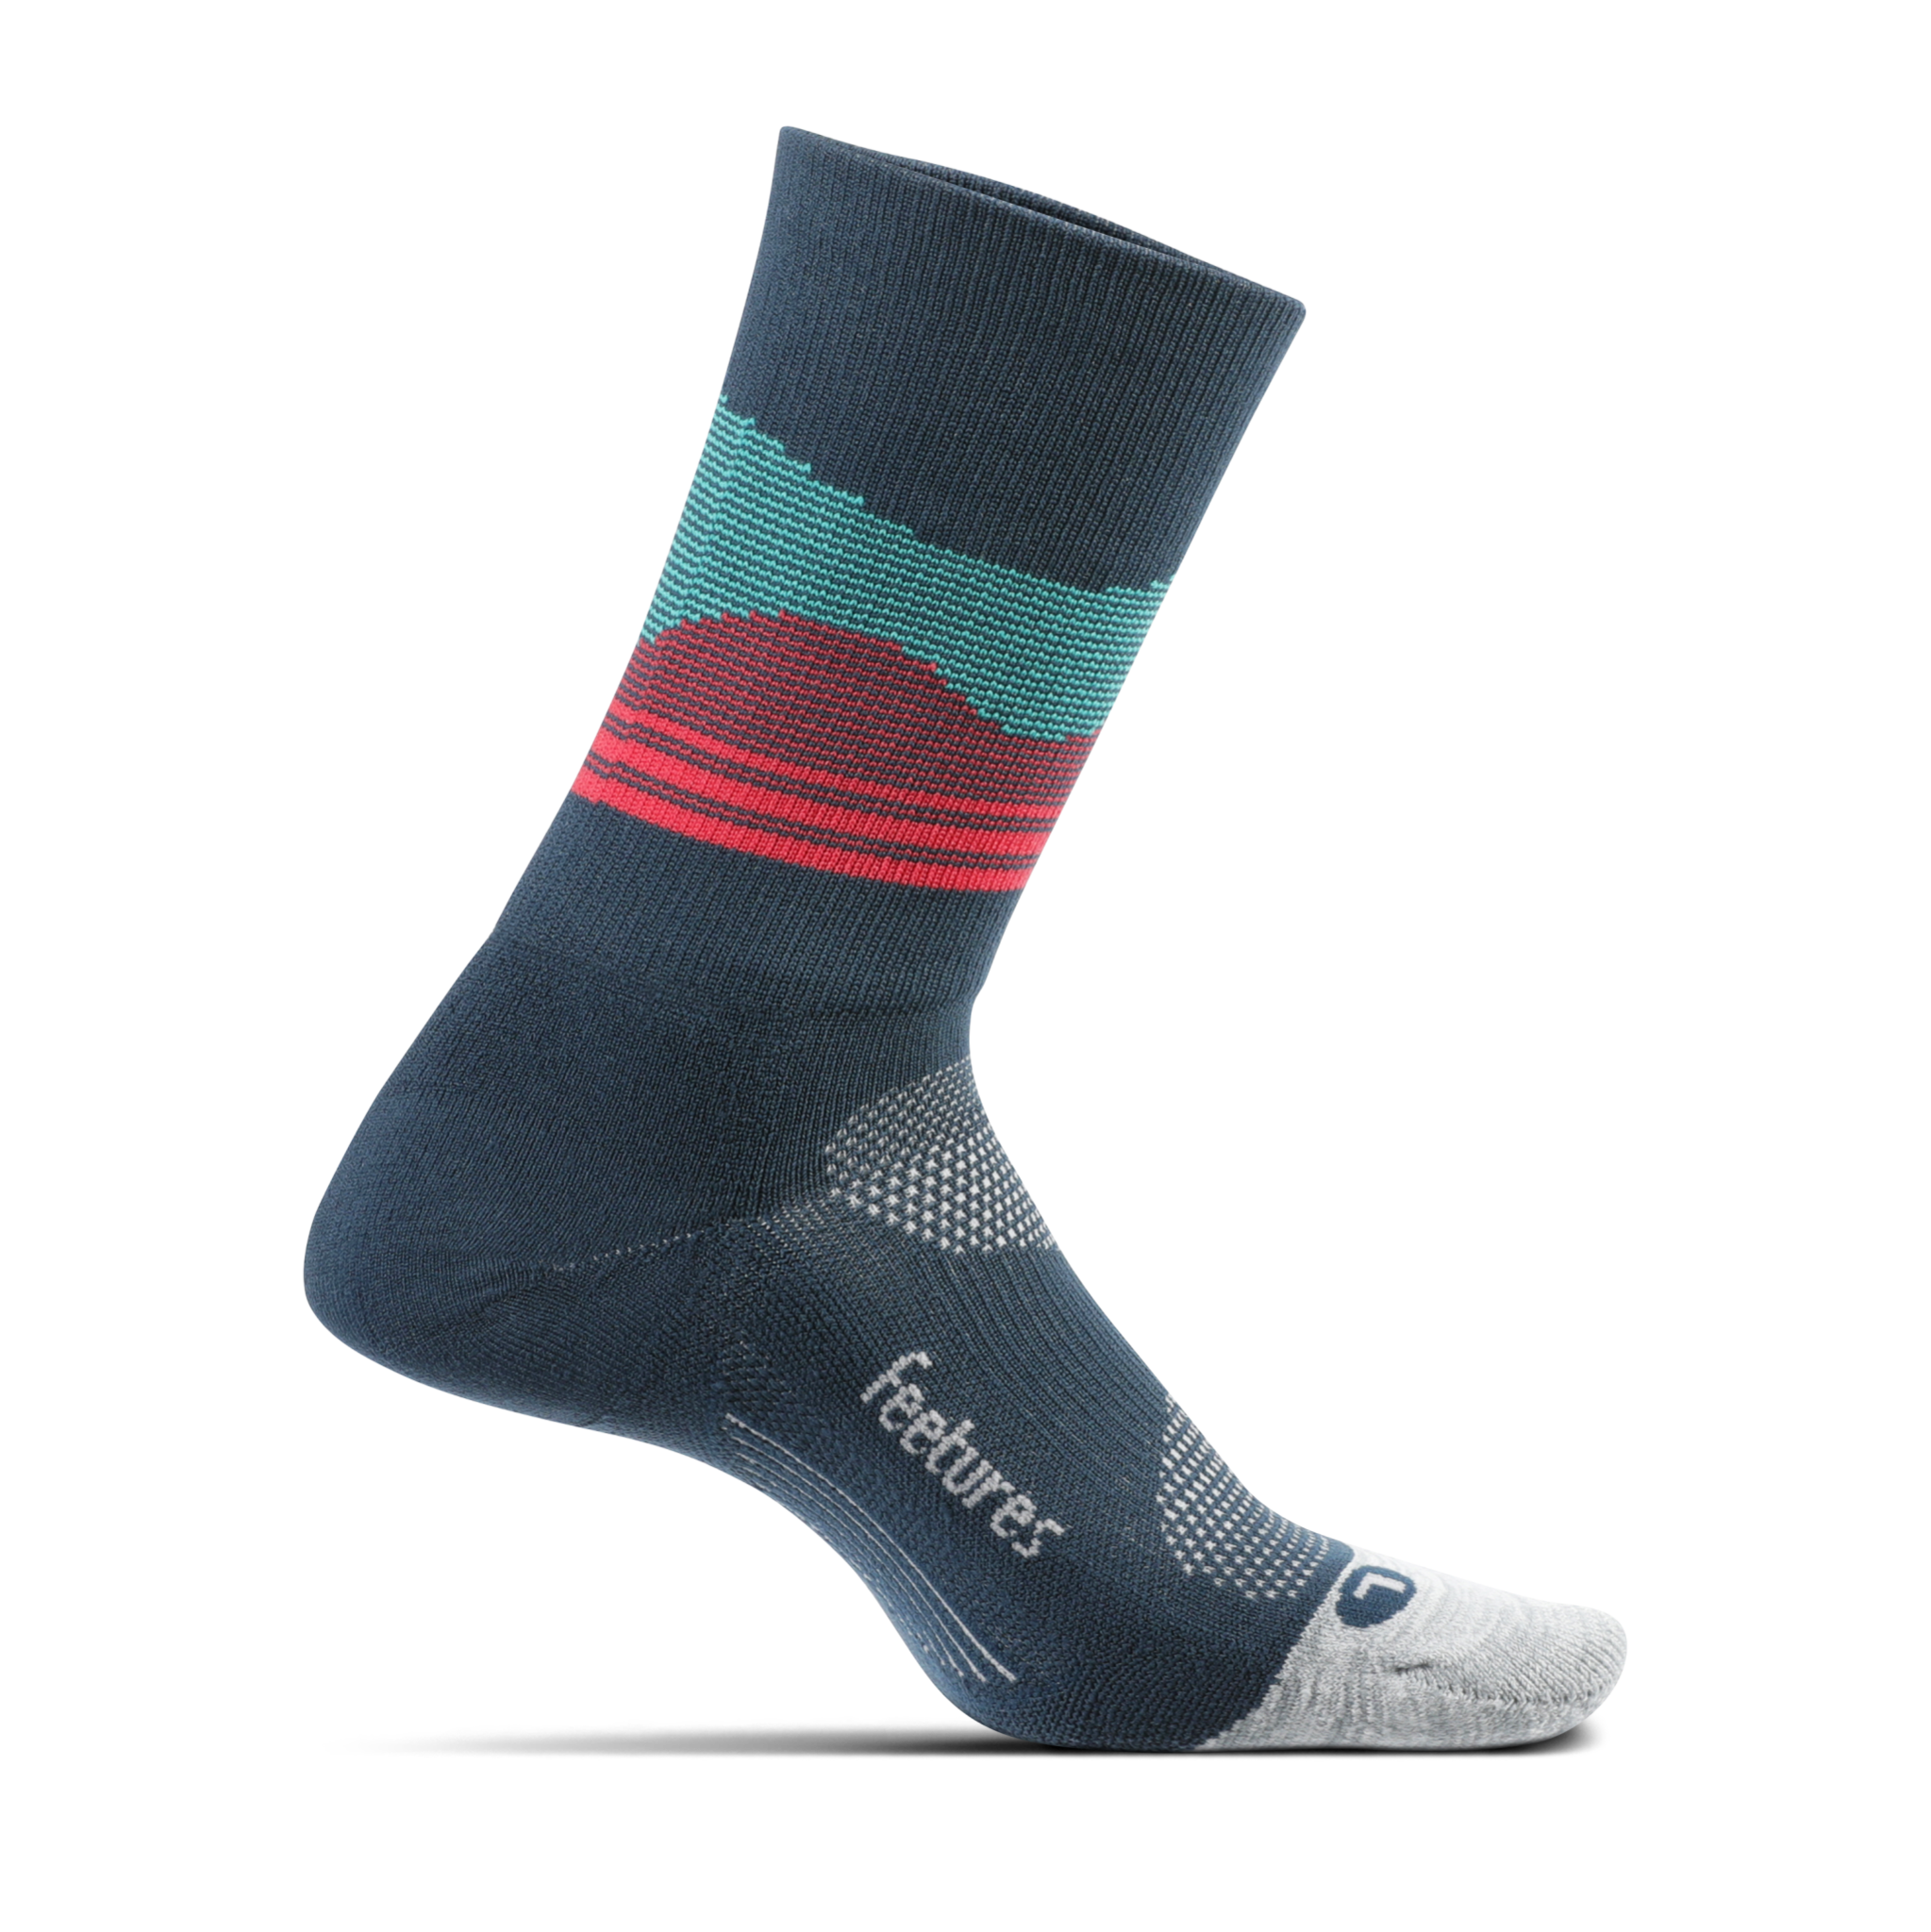 Medial view of the Feetures Elite Cushion Crew Sock in the color French navy daybreak